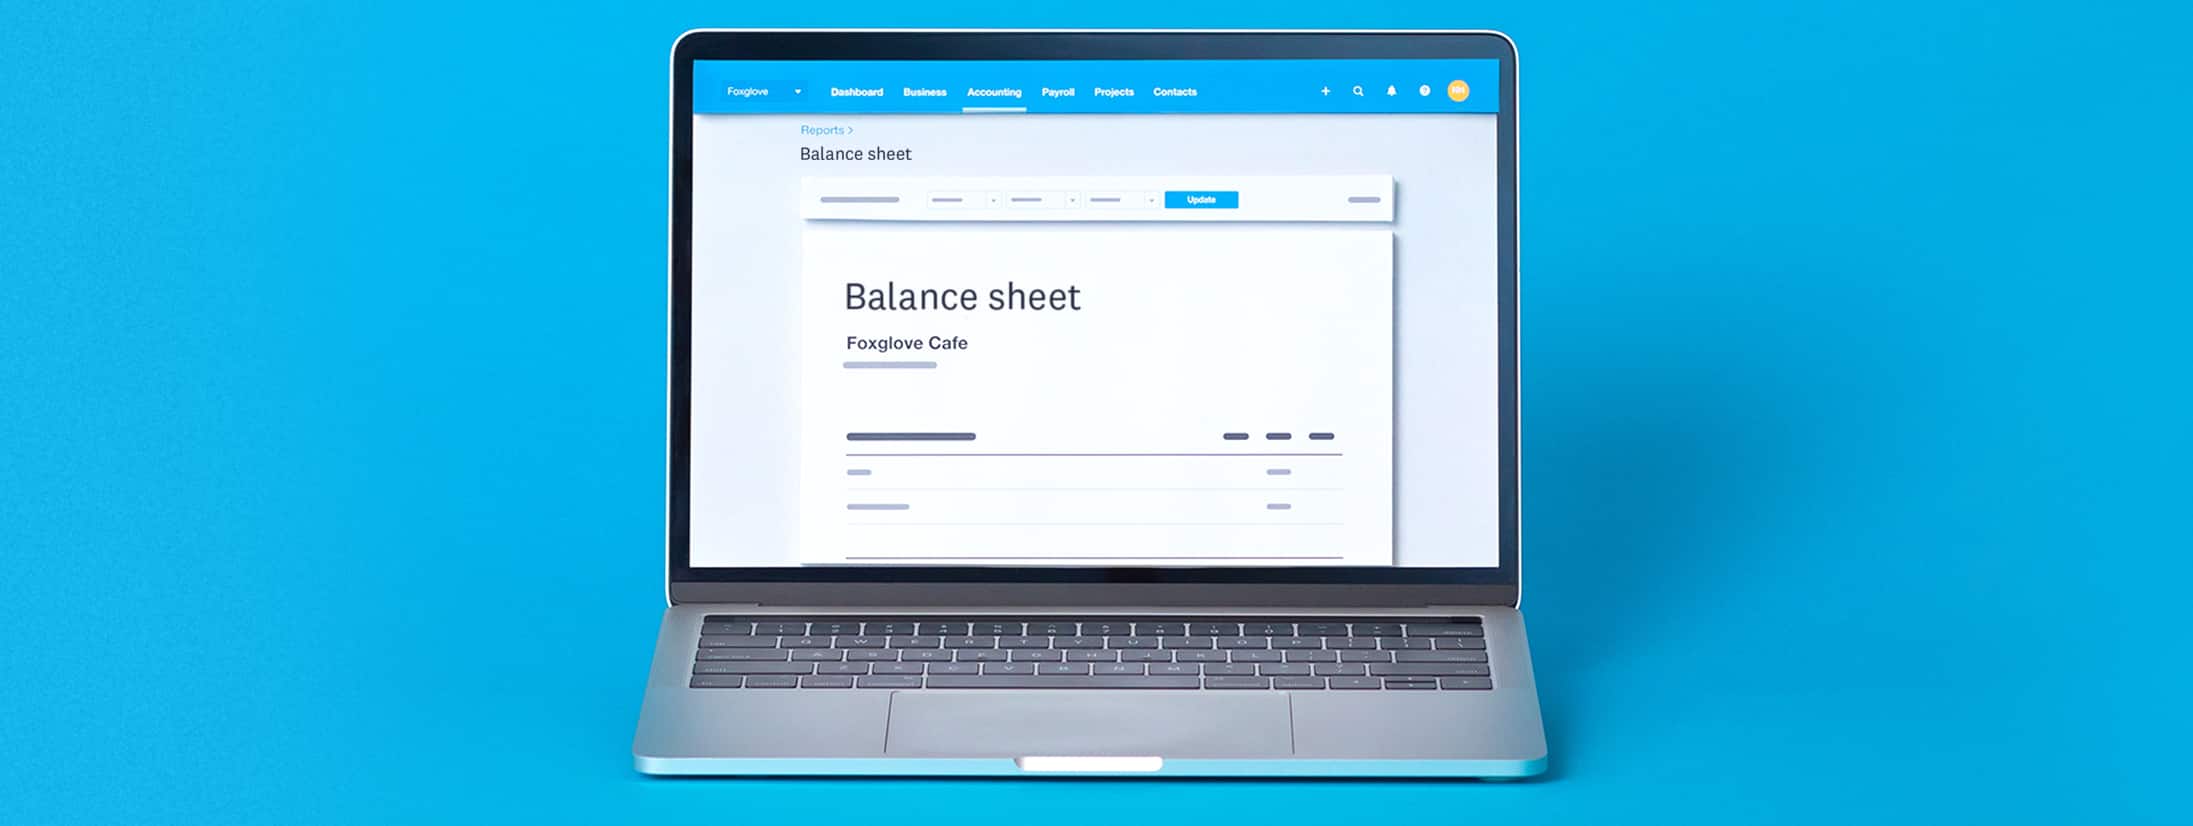 Laptop with balance sheet form on screen